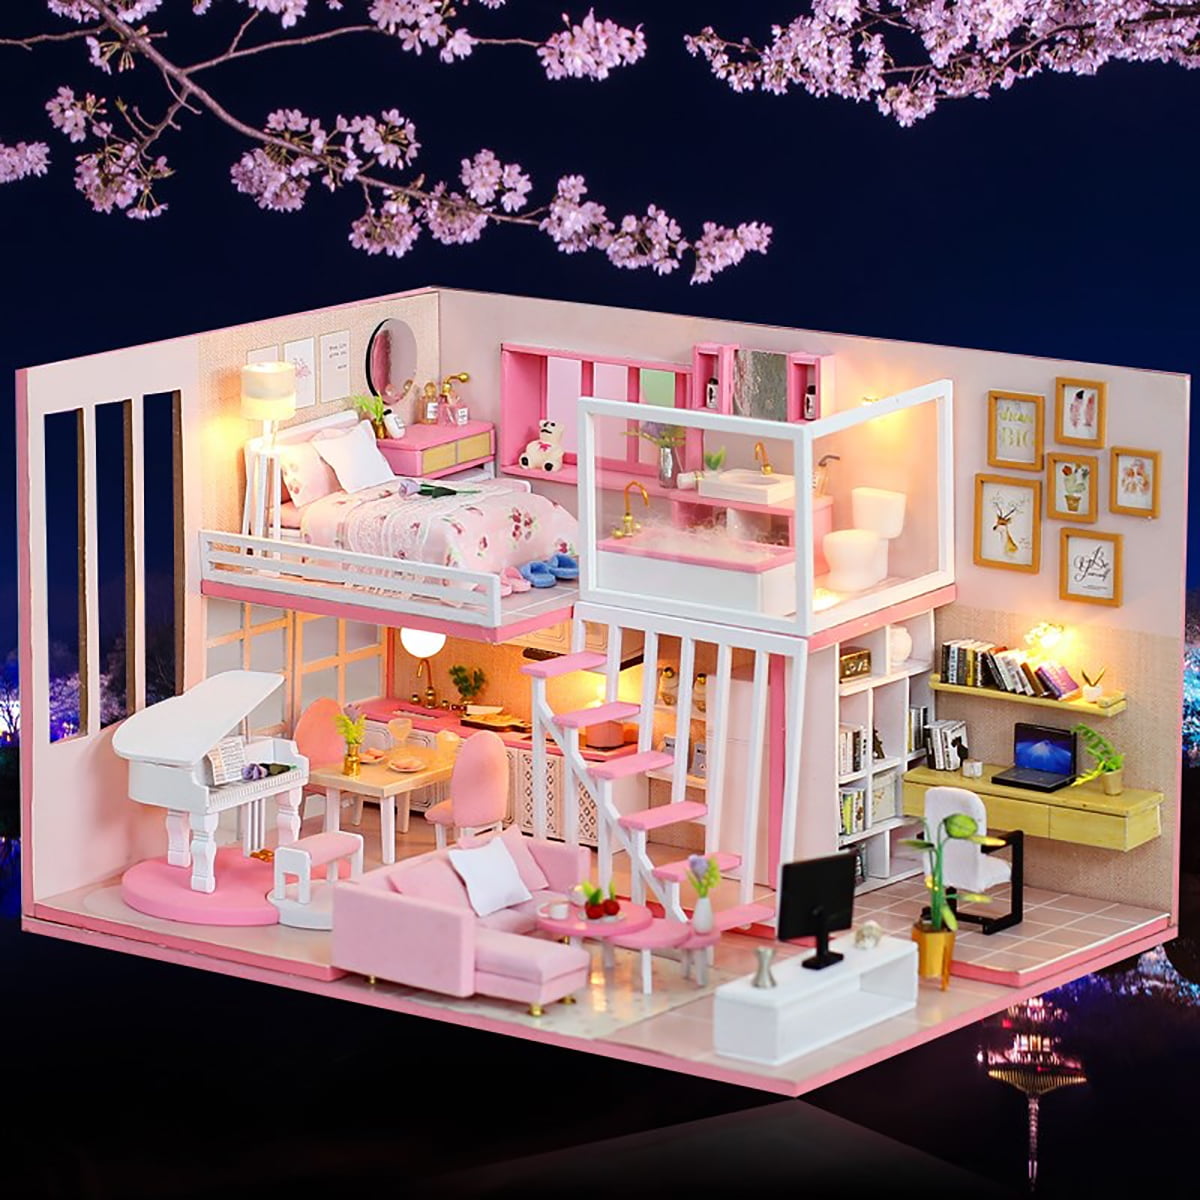 Details about   DIY Miniature DollHouse Kit with LED Handmade House Kits Creative Gift 